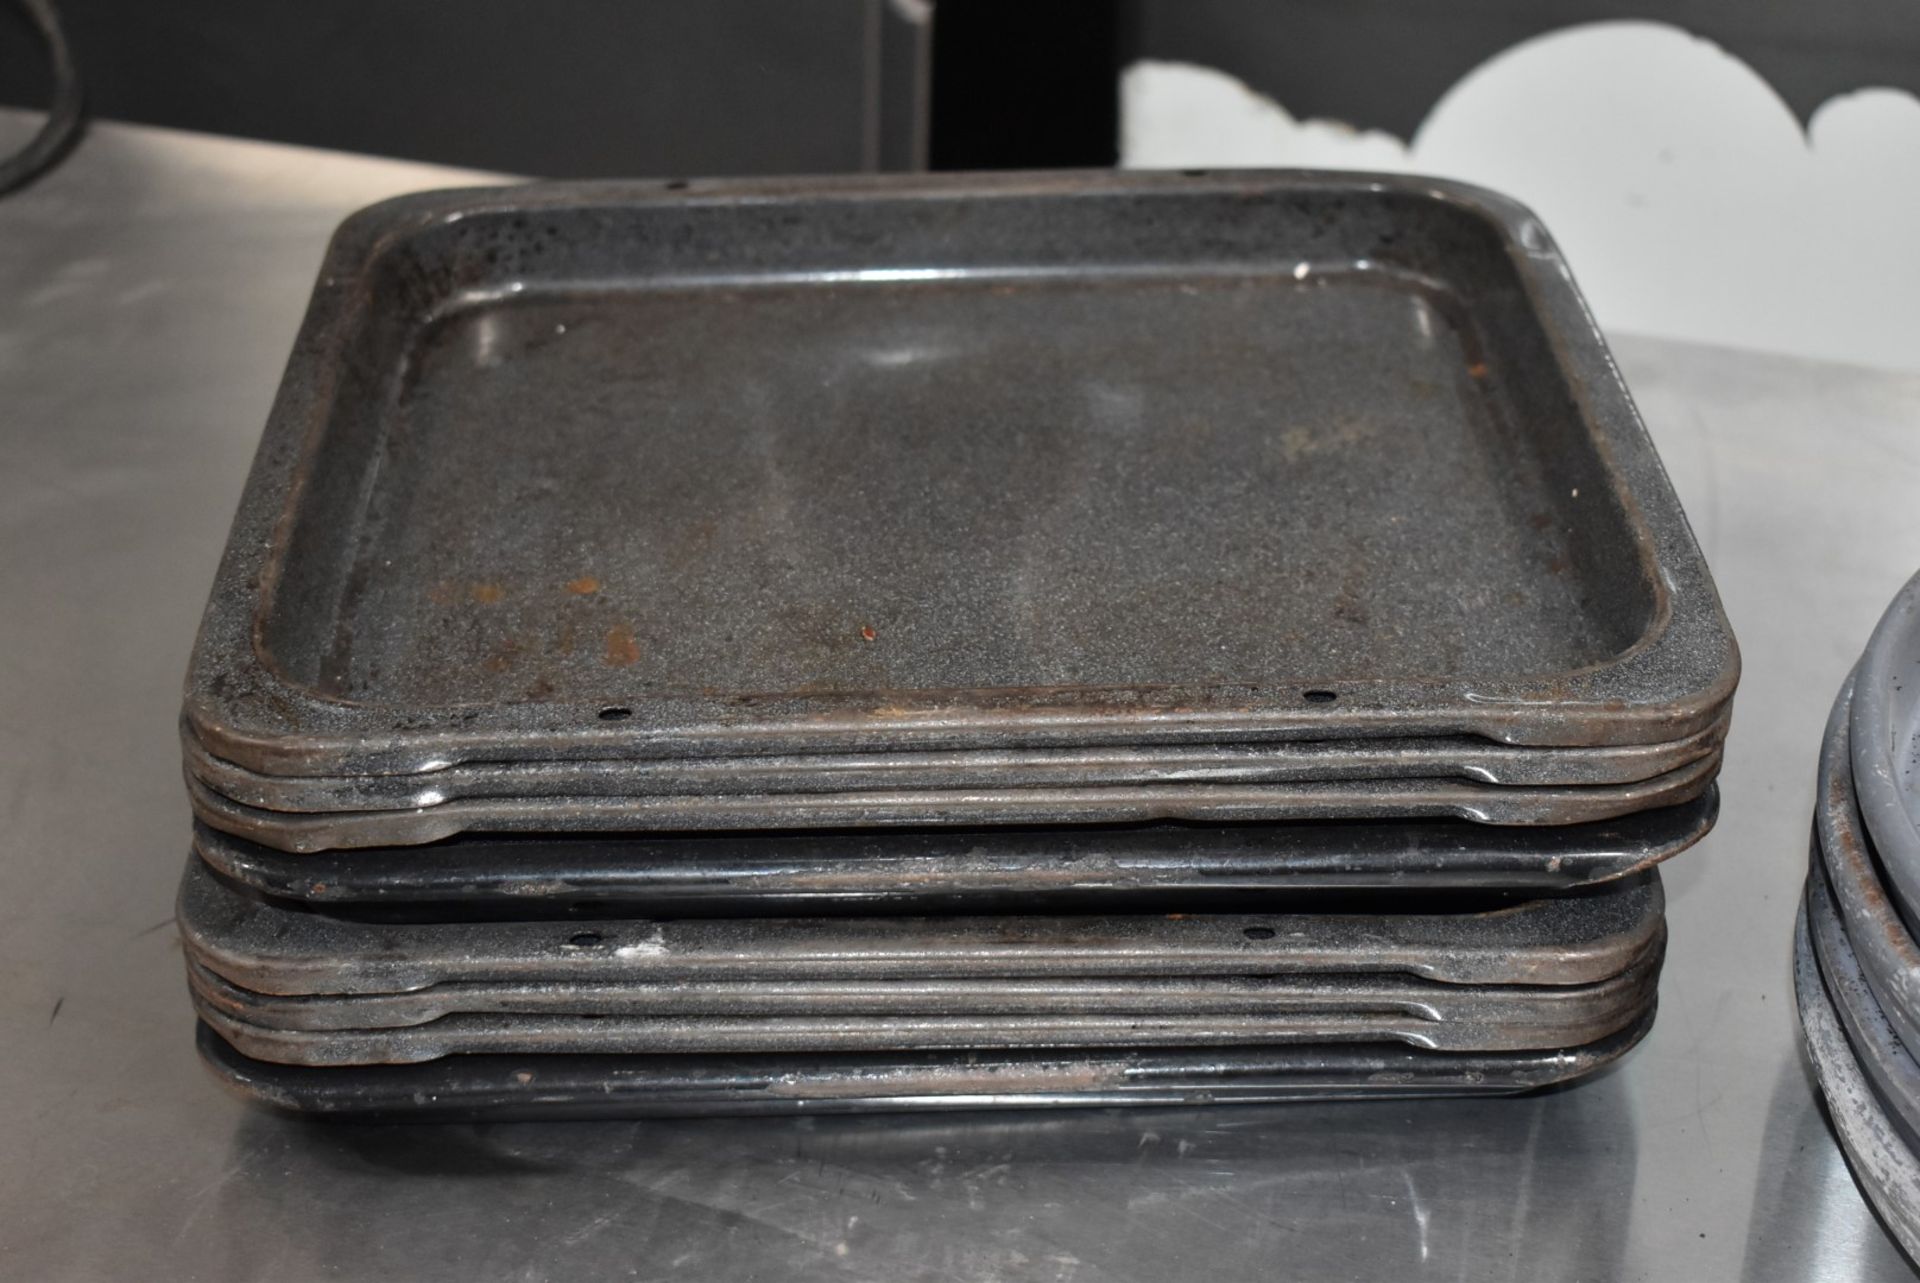 Assorted Collection of 12 x Cooking Trays - Includes 12" Pizza Trays and Deep Oven Trays 32 x 28 cms - Image 6 of 6